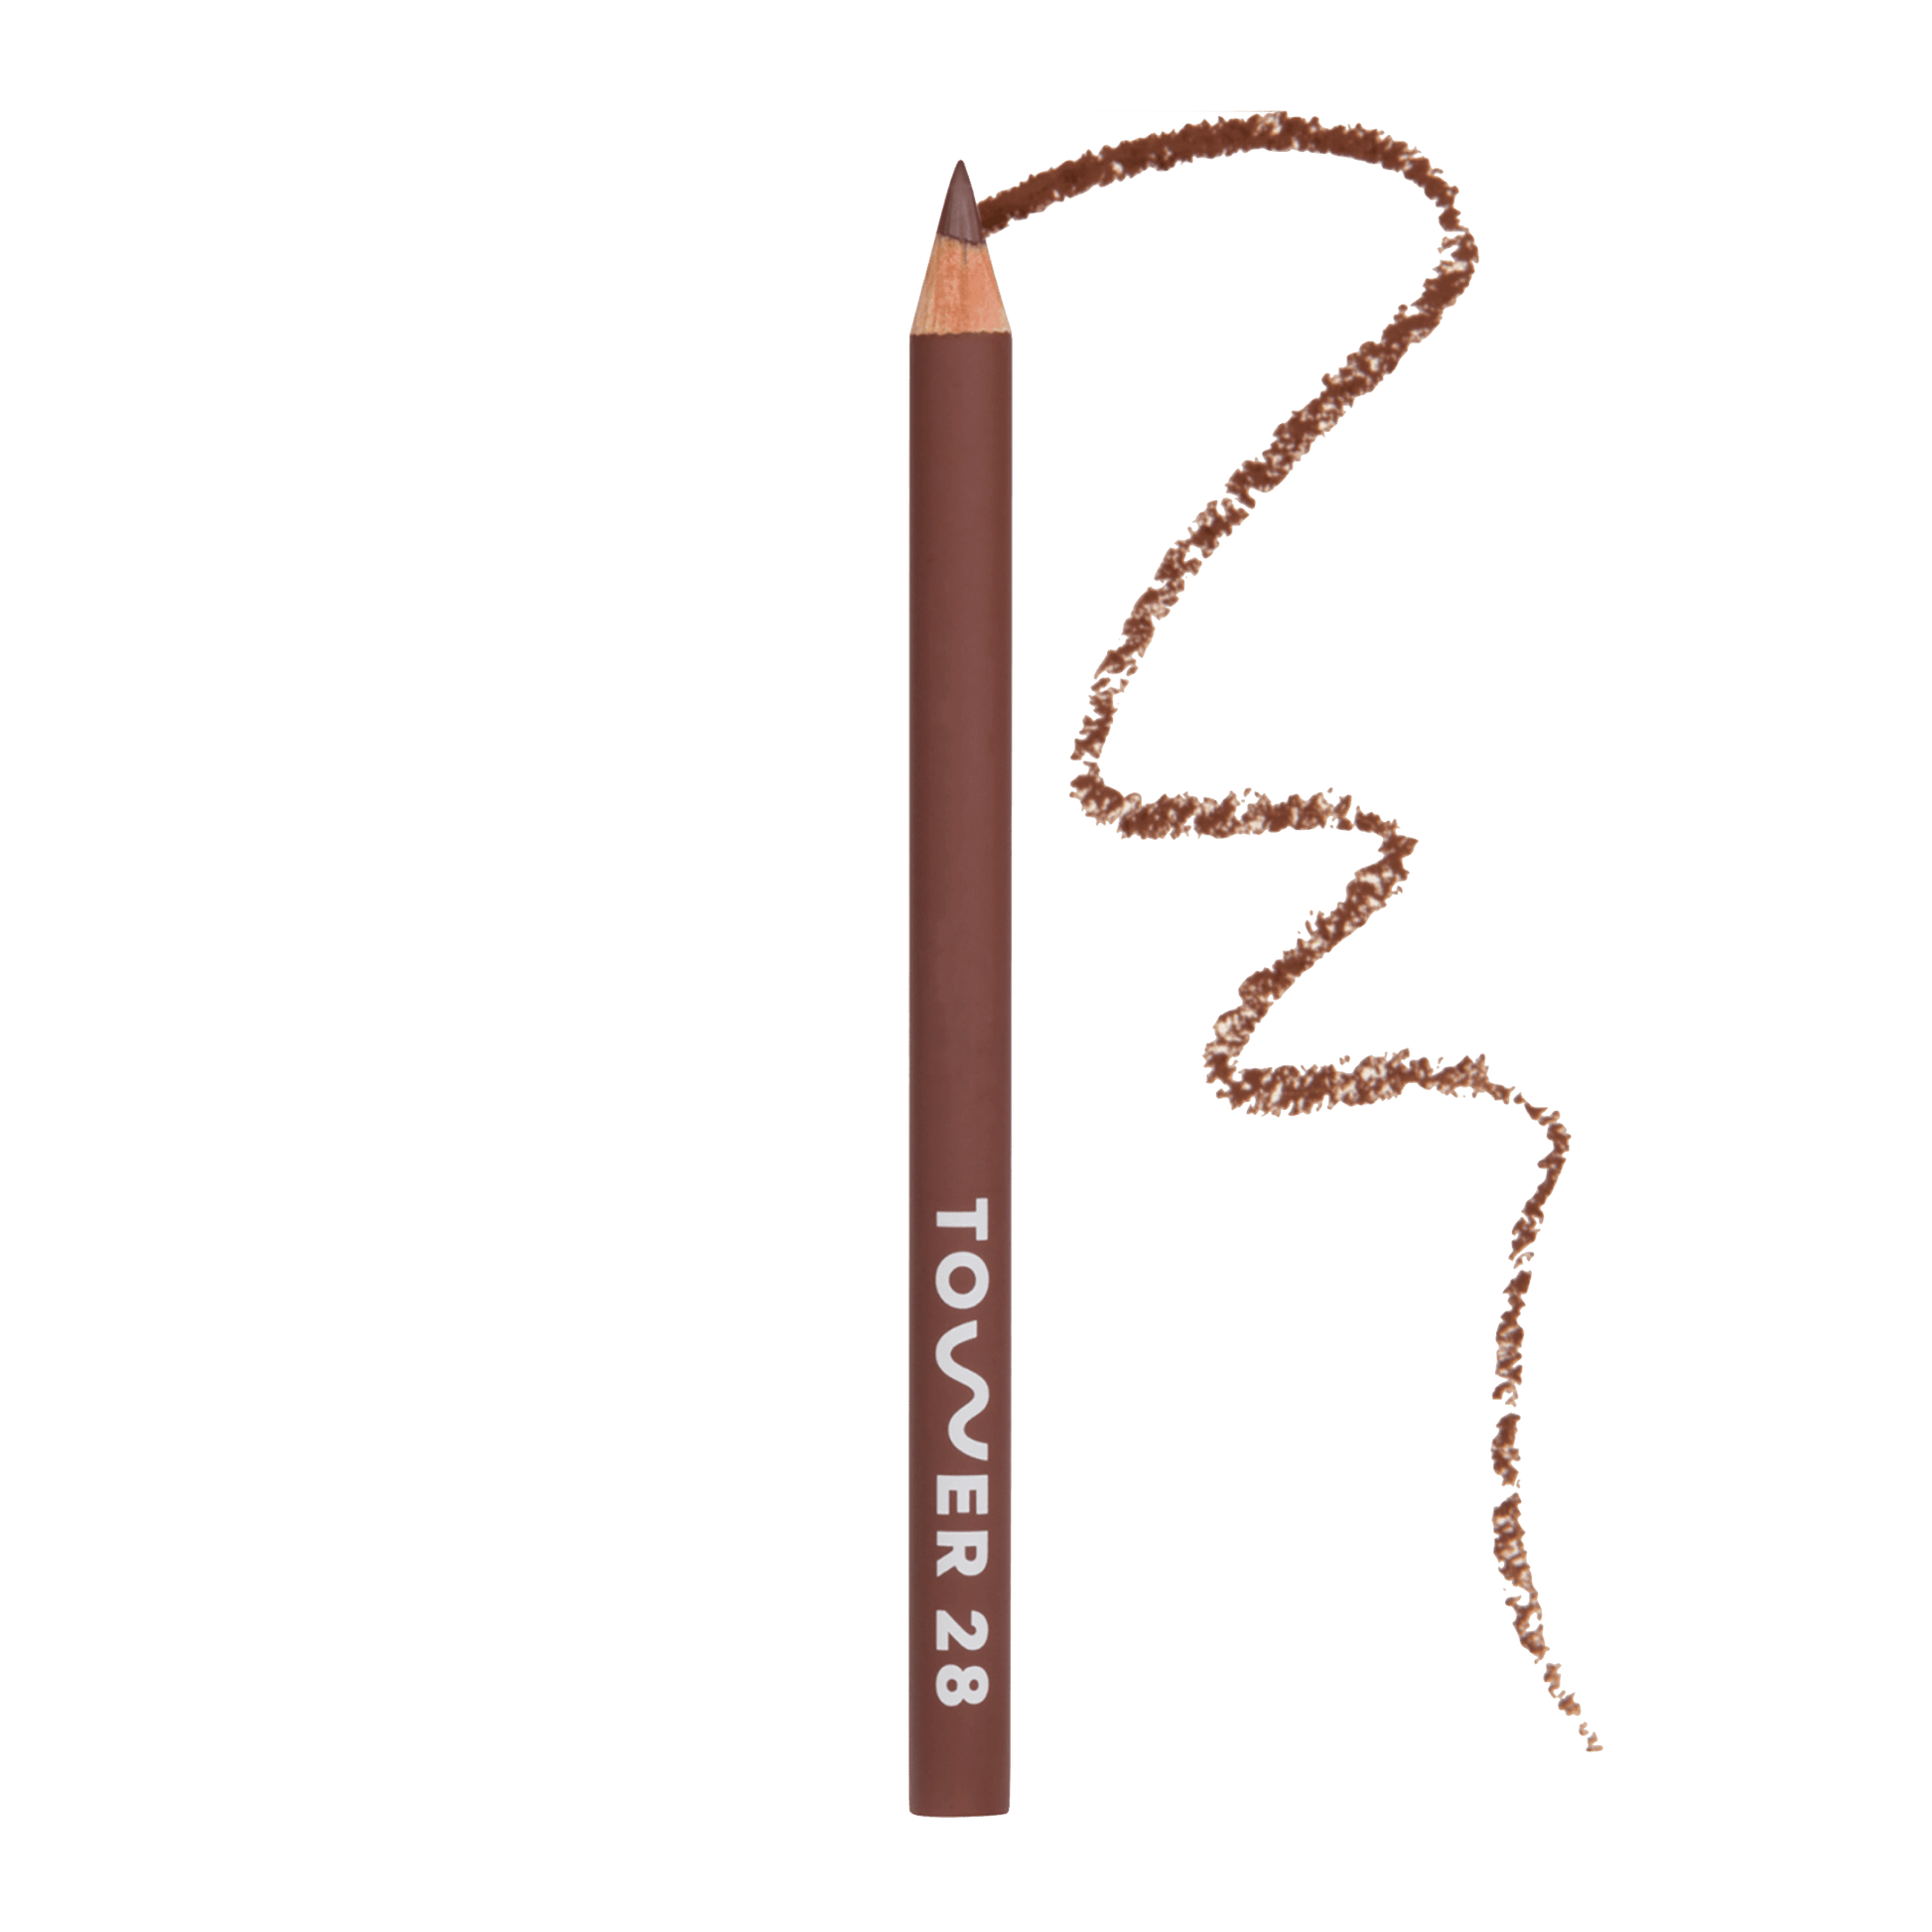 The Tower 28 Beauty OneLiner Lip Liner in the shade Draw Me